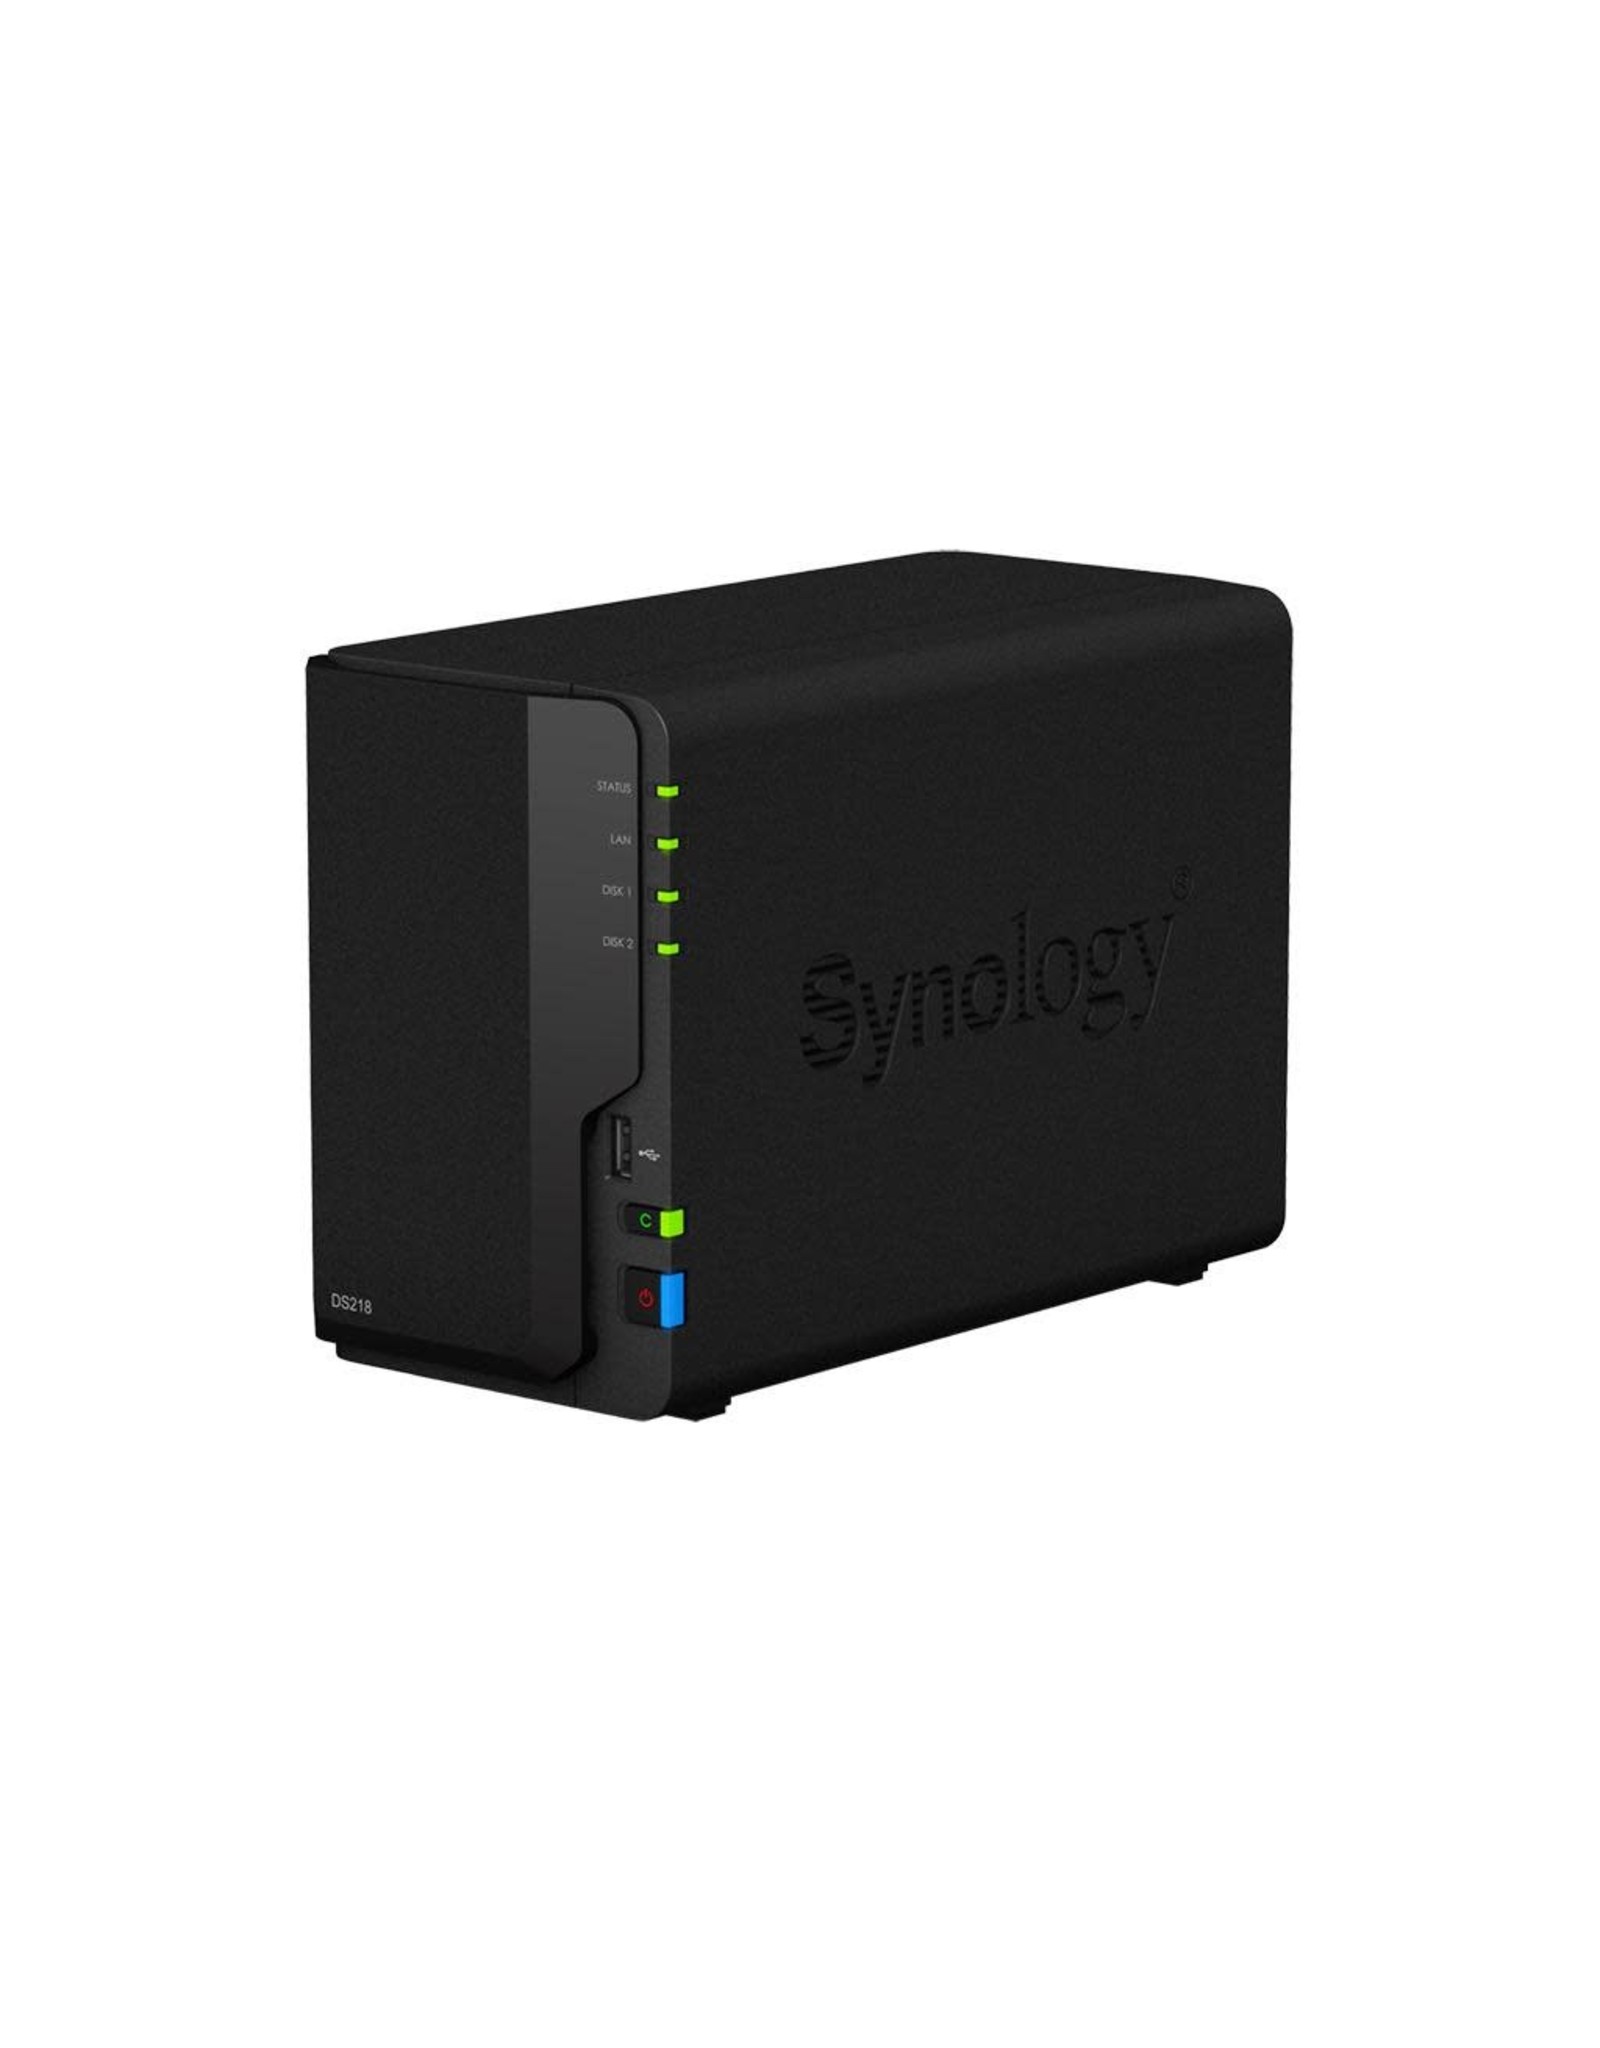 Synology Synology DS218 2-Bay Quad-core 1.4GHz NAS Server